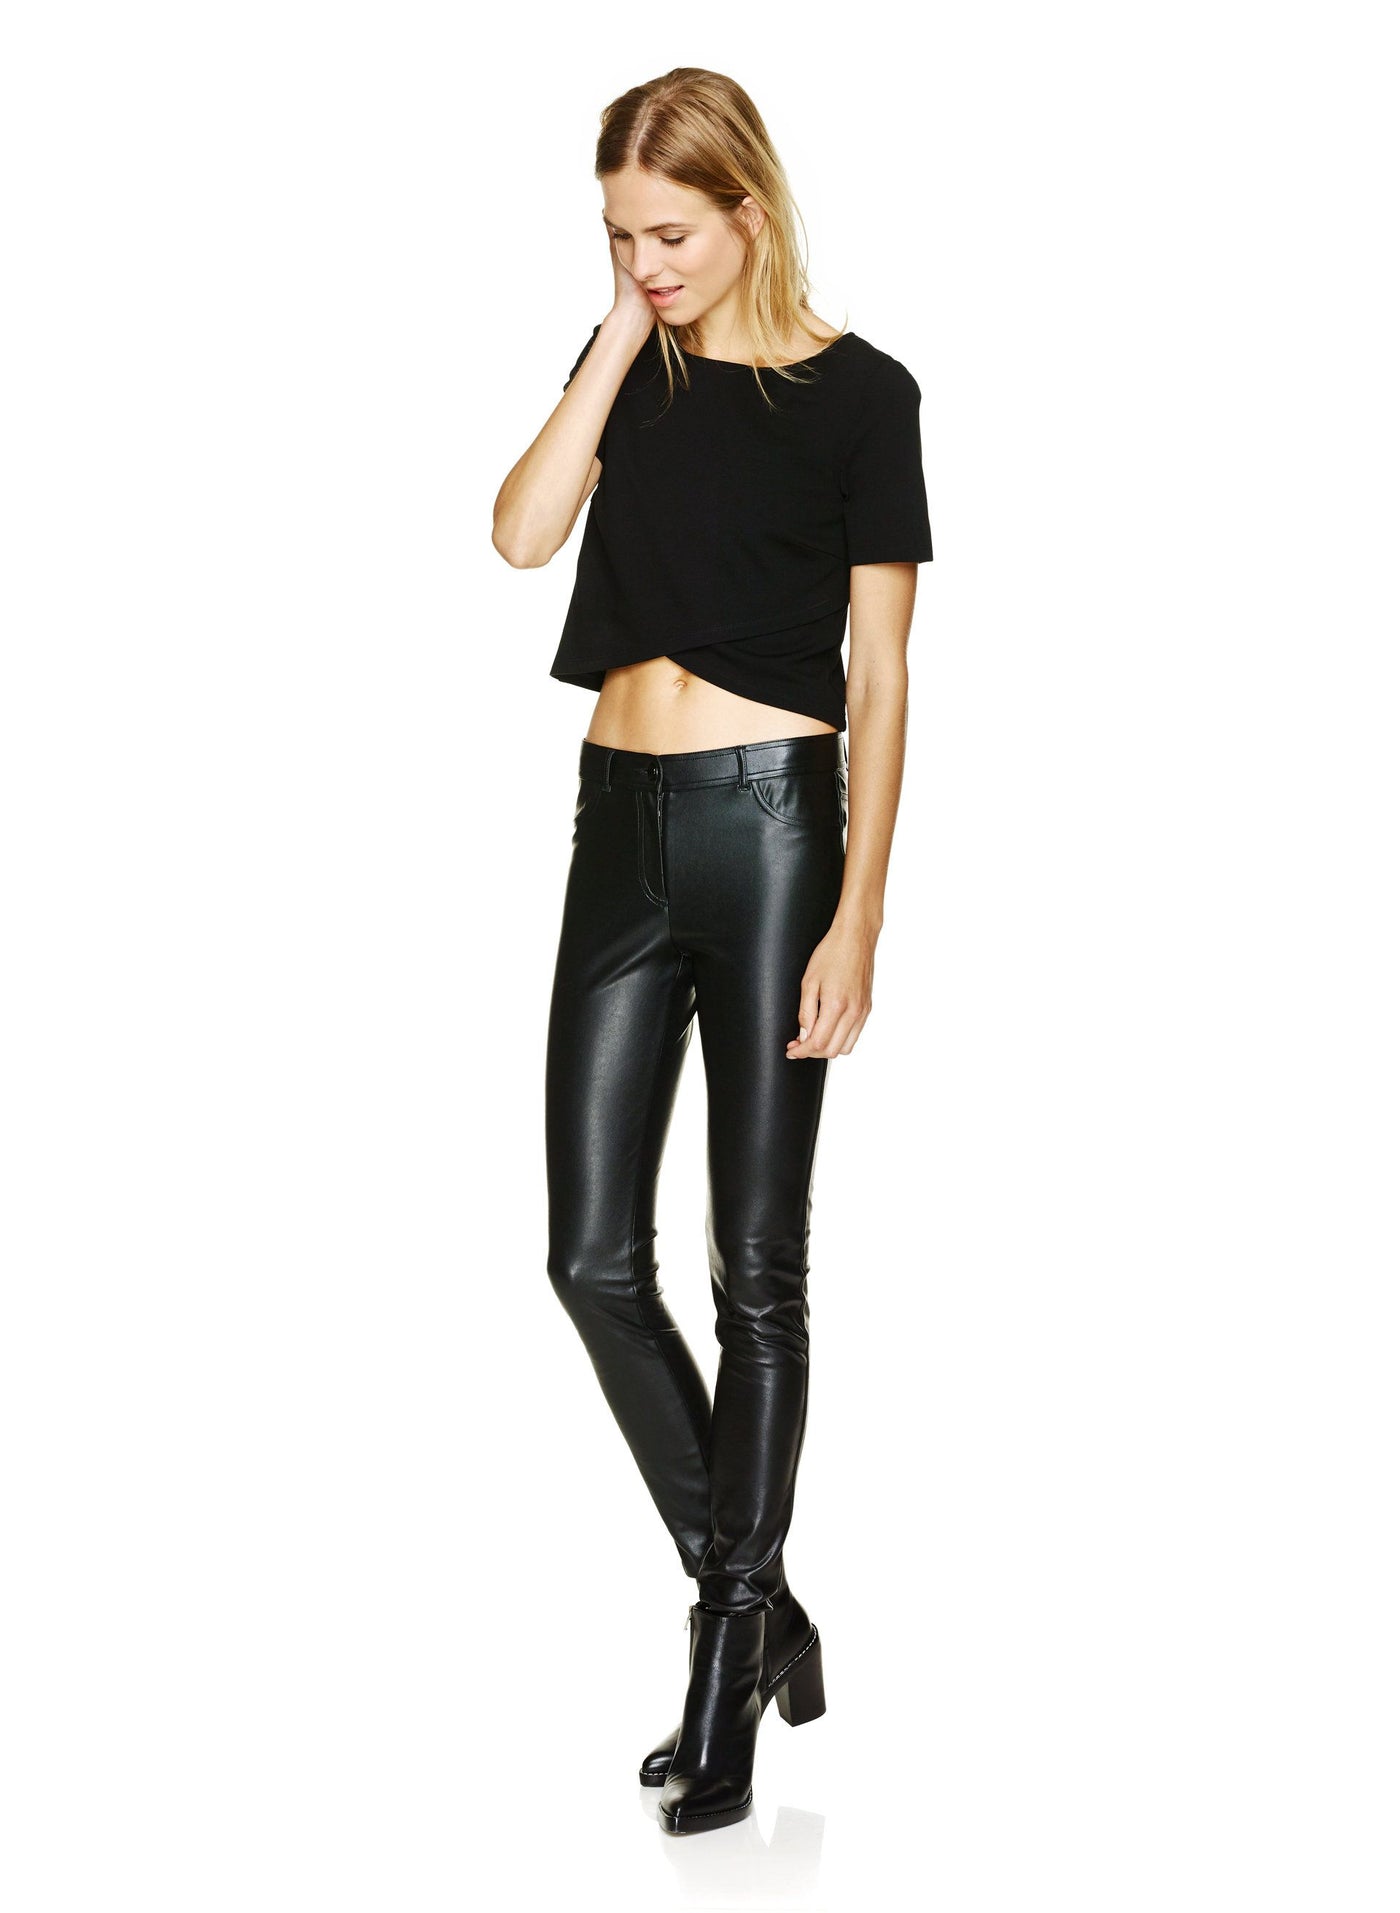 Pre Loved, Wilfred Free, Faux Leather Pants